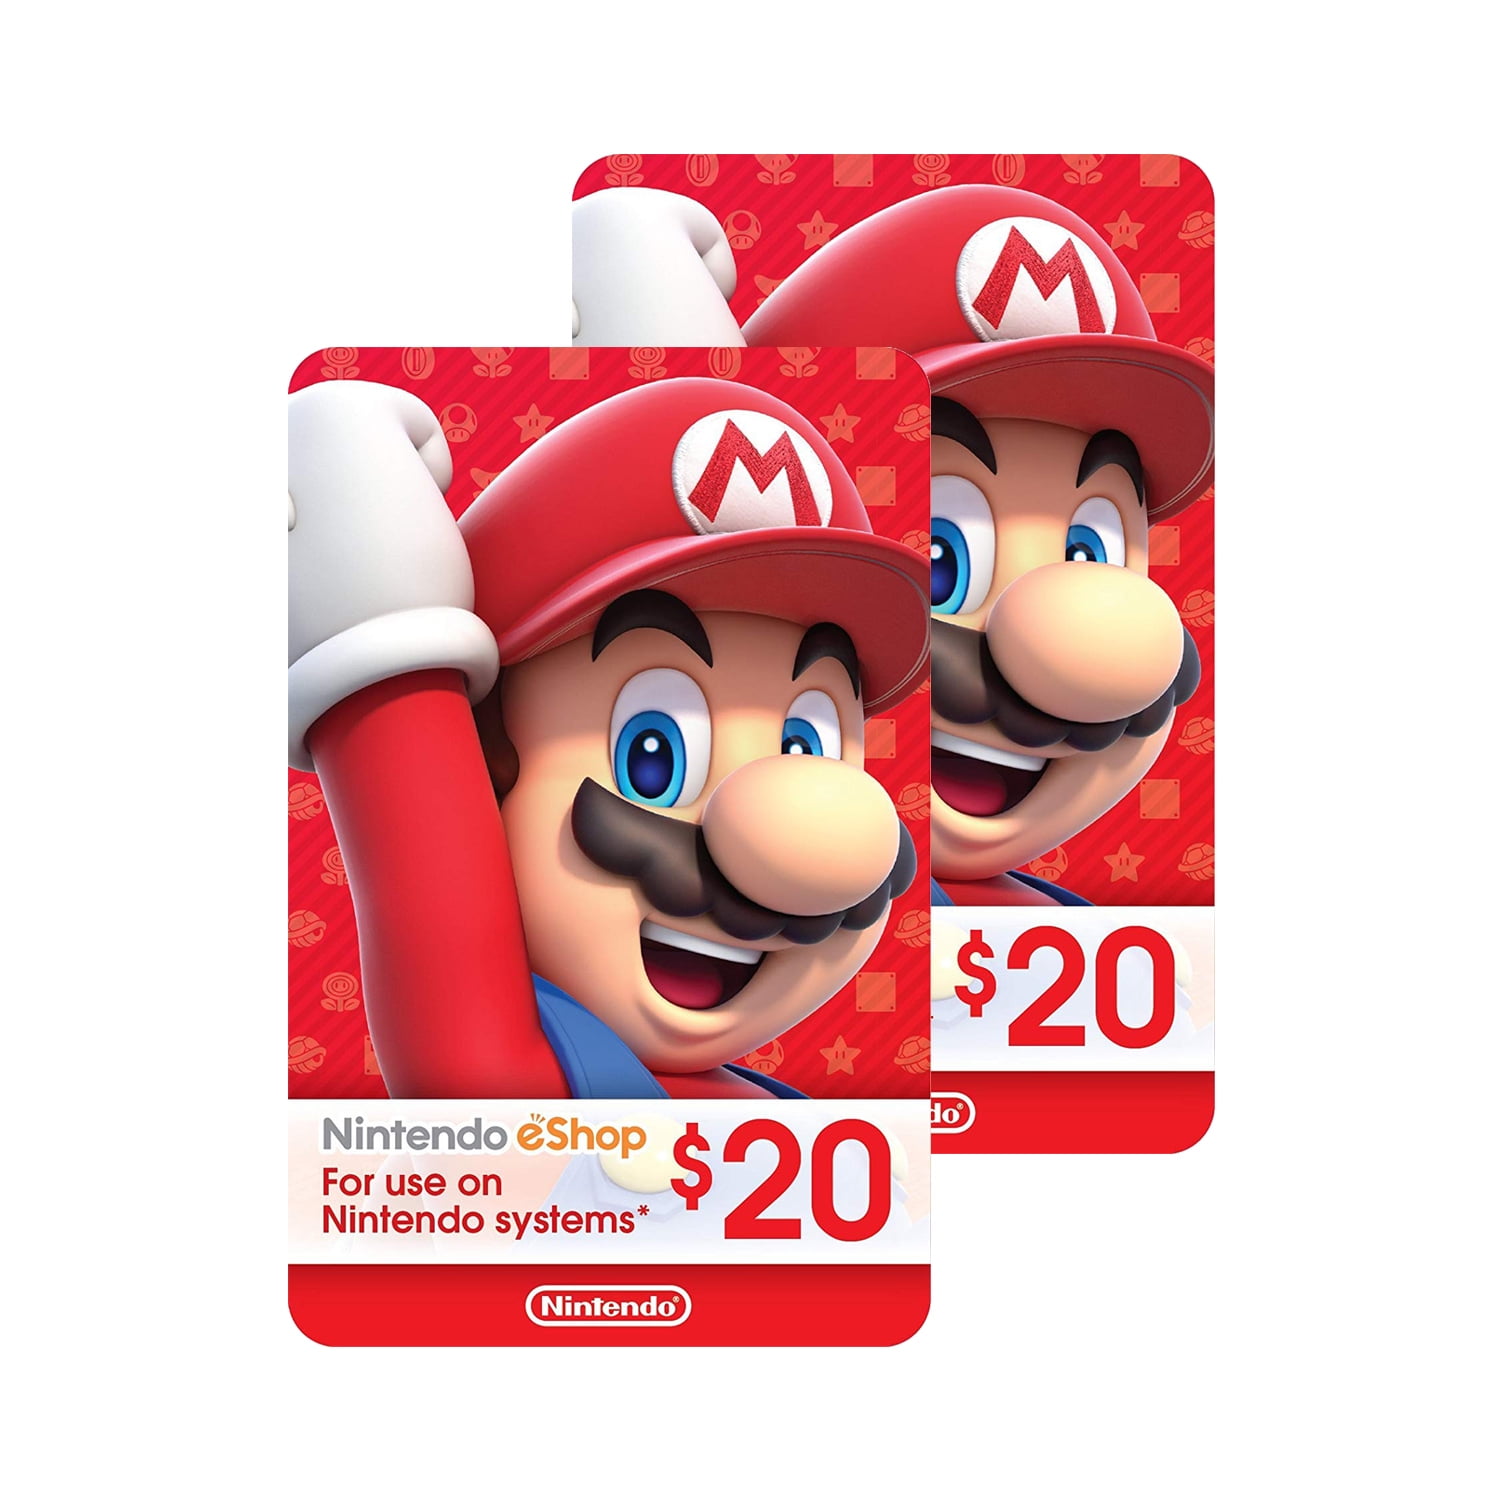 Cards) Physical Cards pack eShop Nintendo of Gift (2 $20.00 $40.00